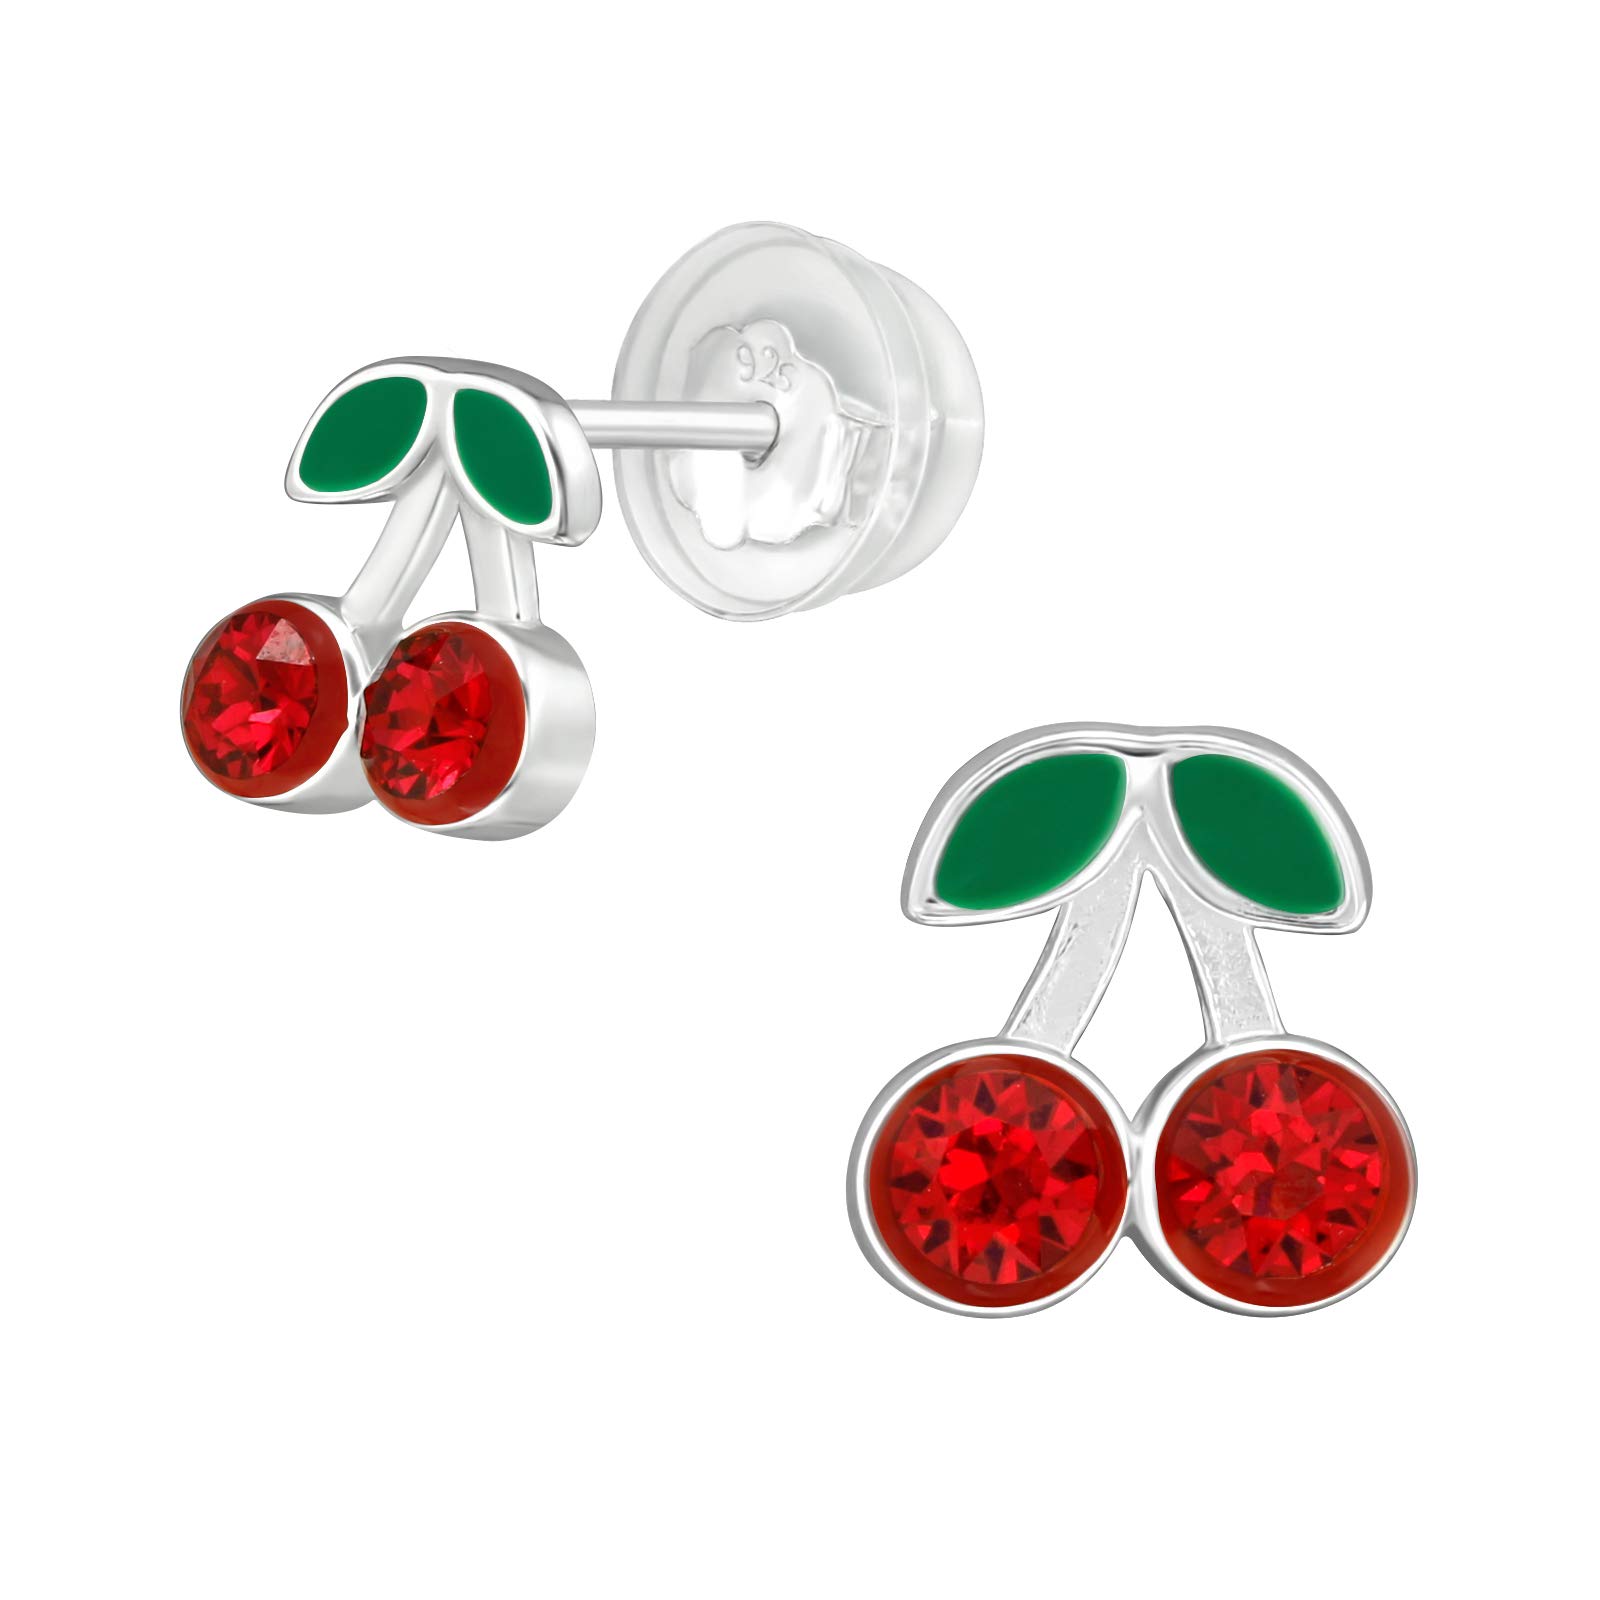 AUBE JEWELRY Hypoallergenic 925 Sterling Silver Cherry Fruit Stud Earrings Adorned with Crystals with Comfort Fit Push Back Closings for Girls and Women